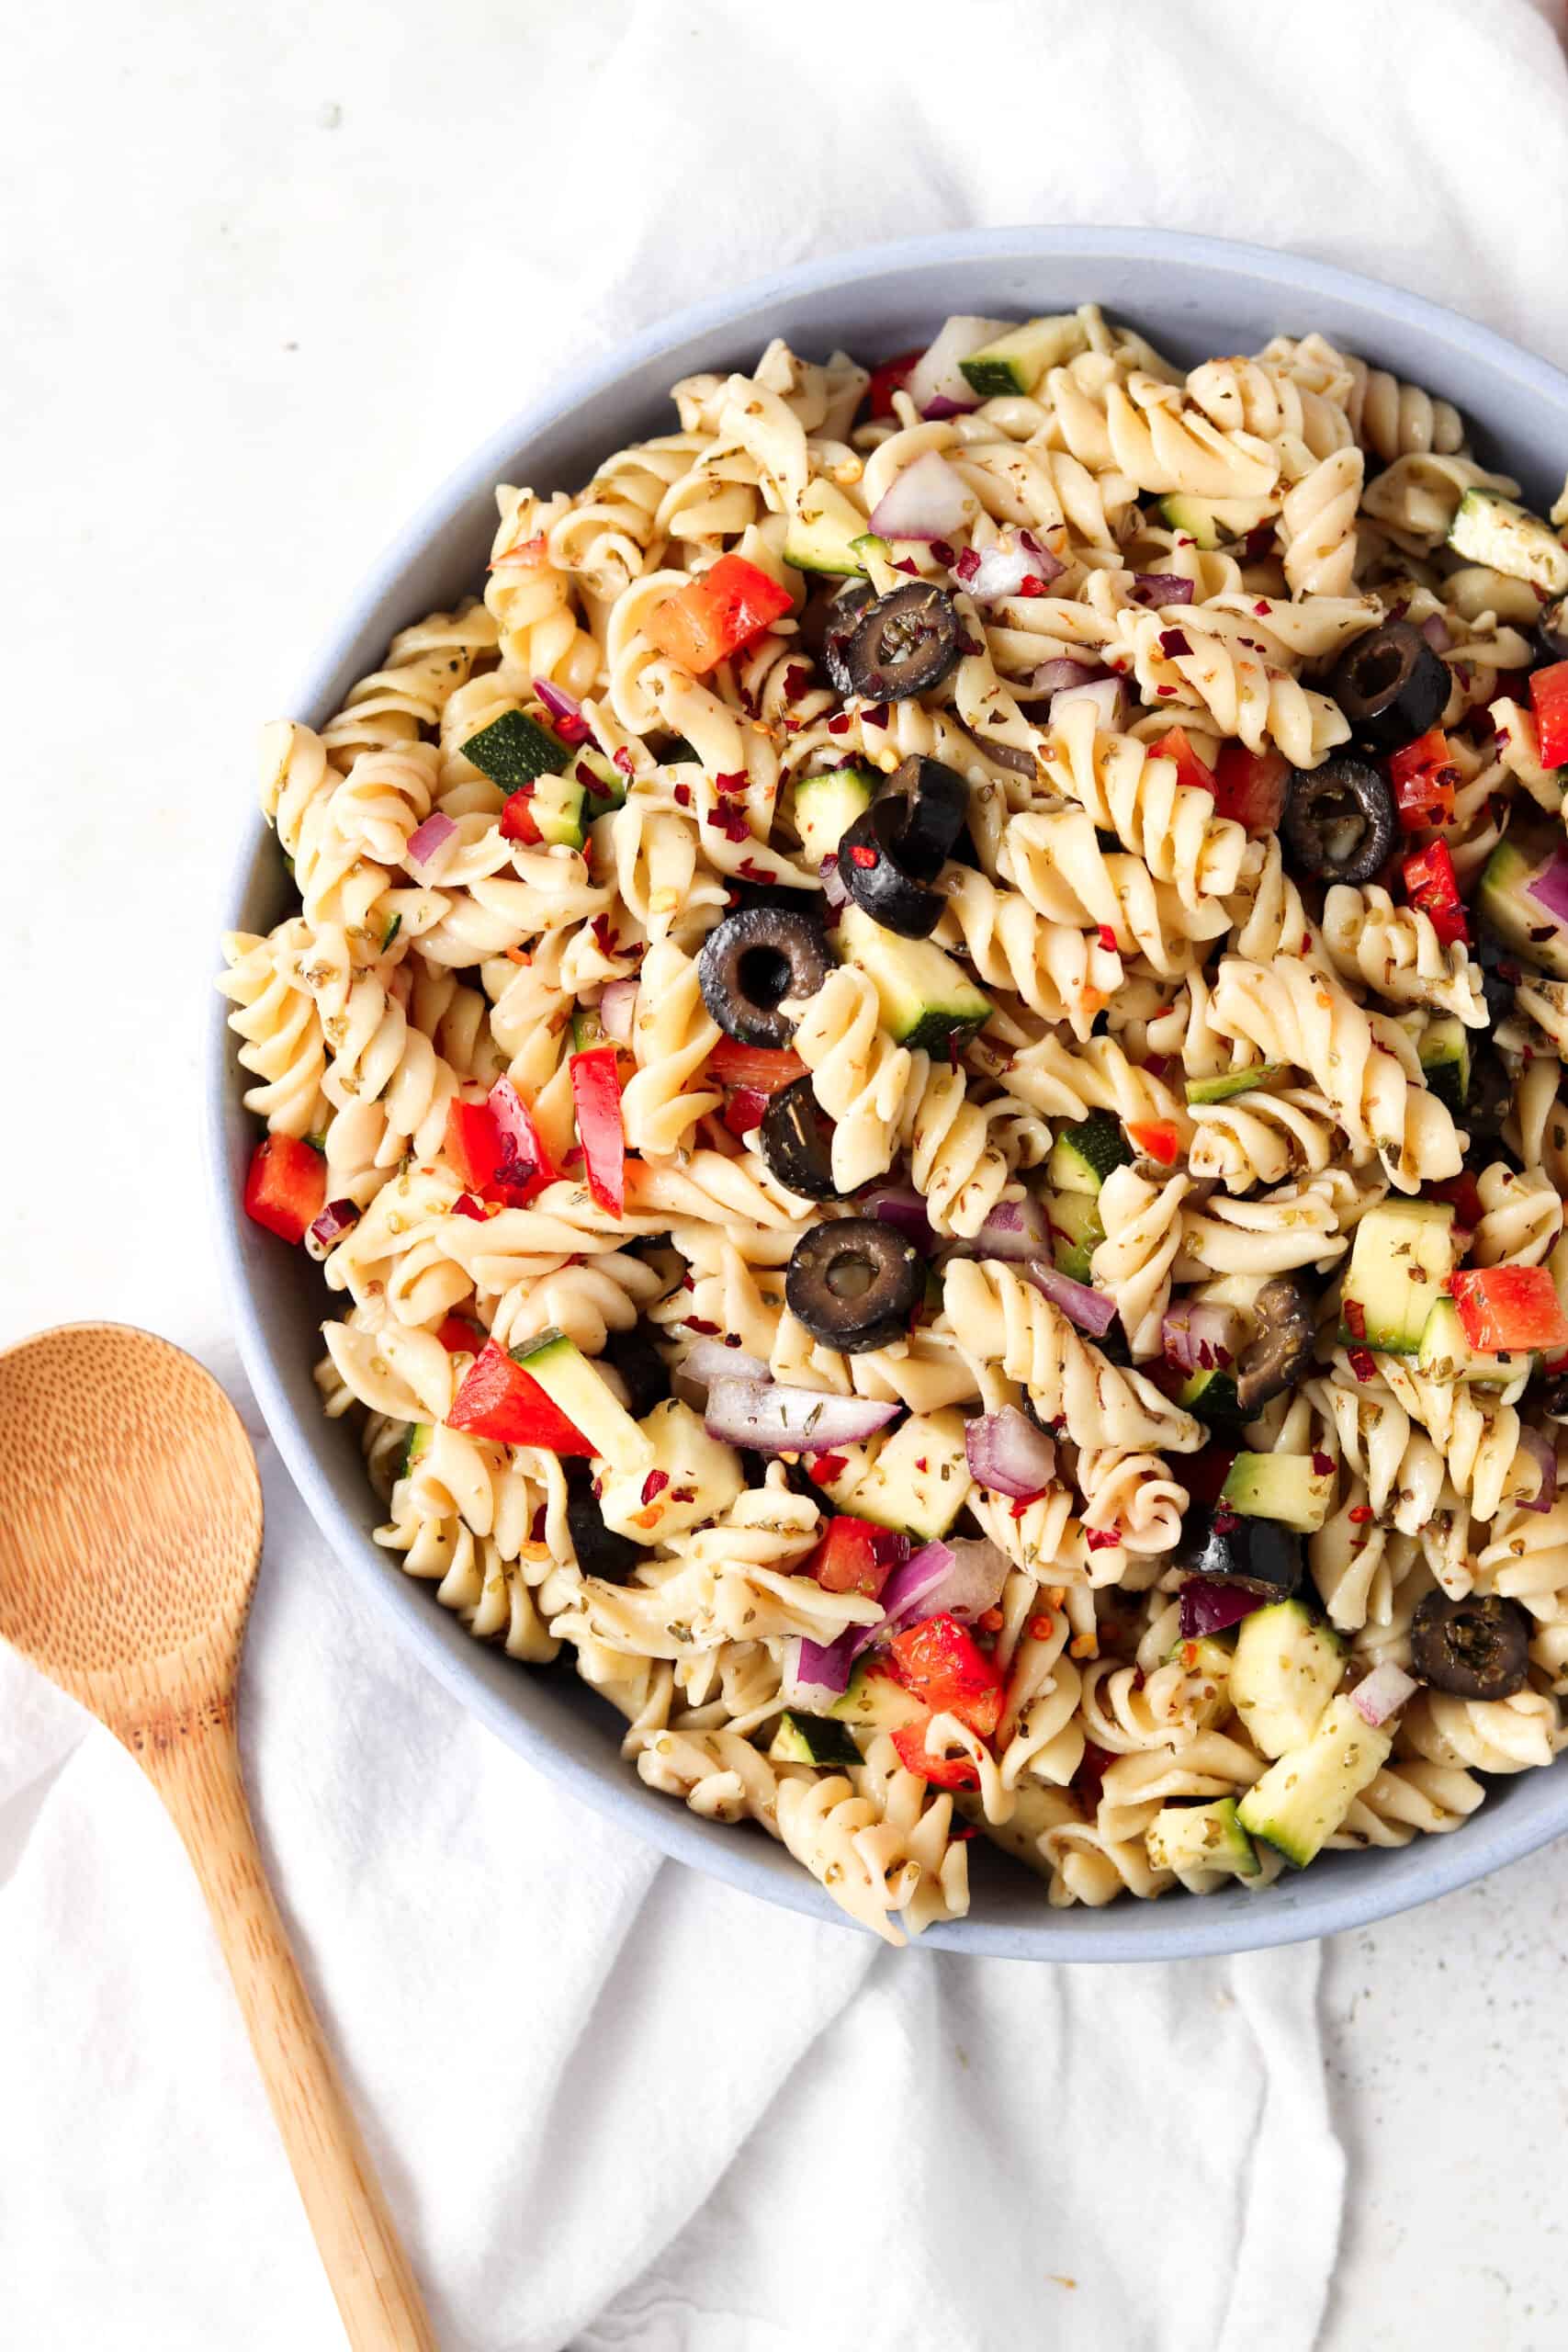 Paleo pasta salad in a blue bowl with a wooden spoon.